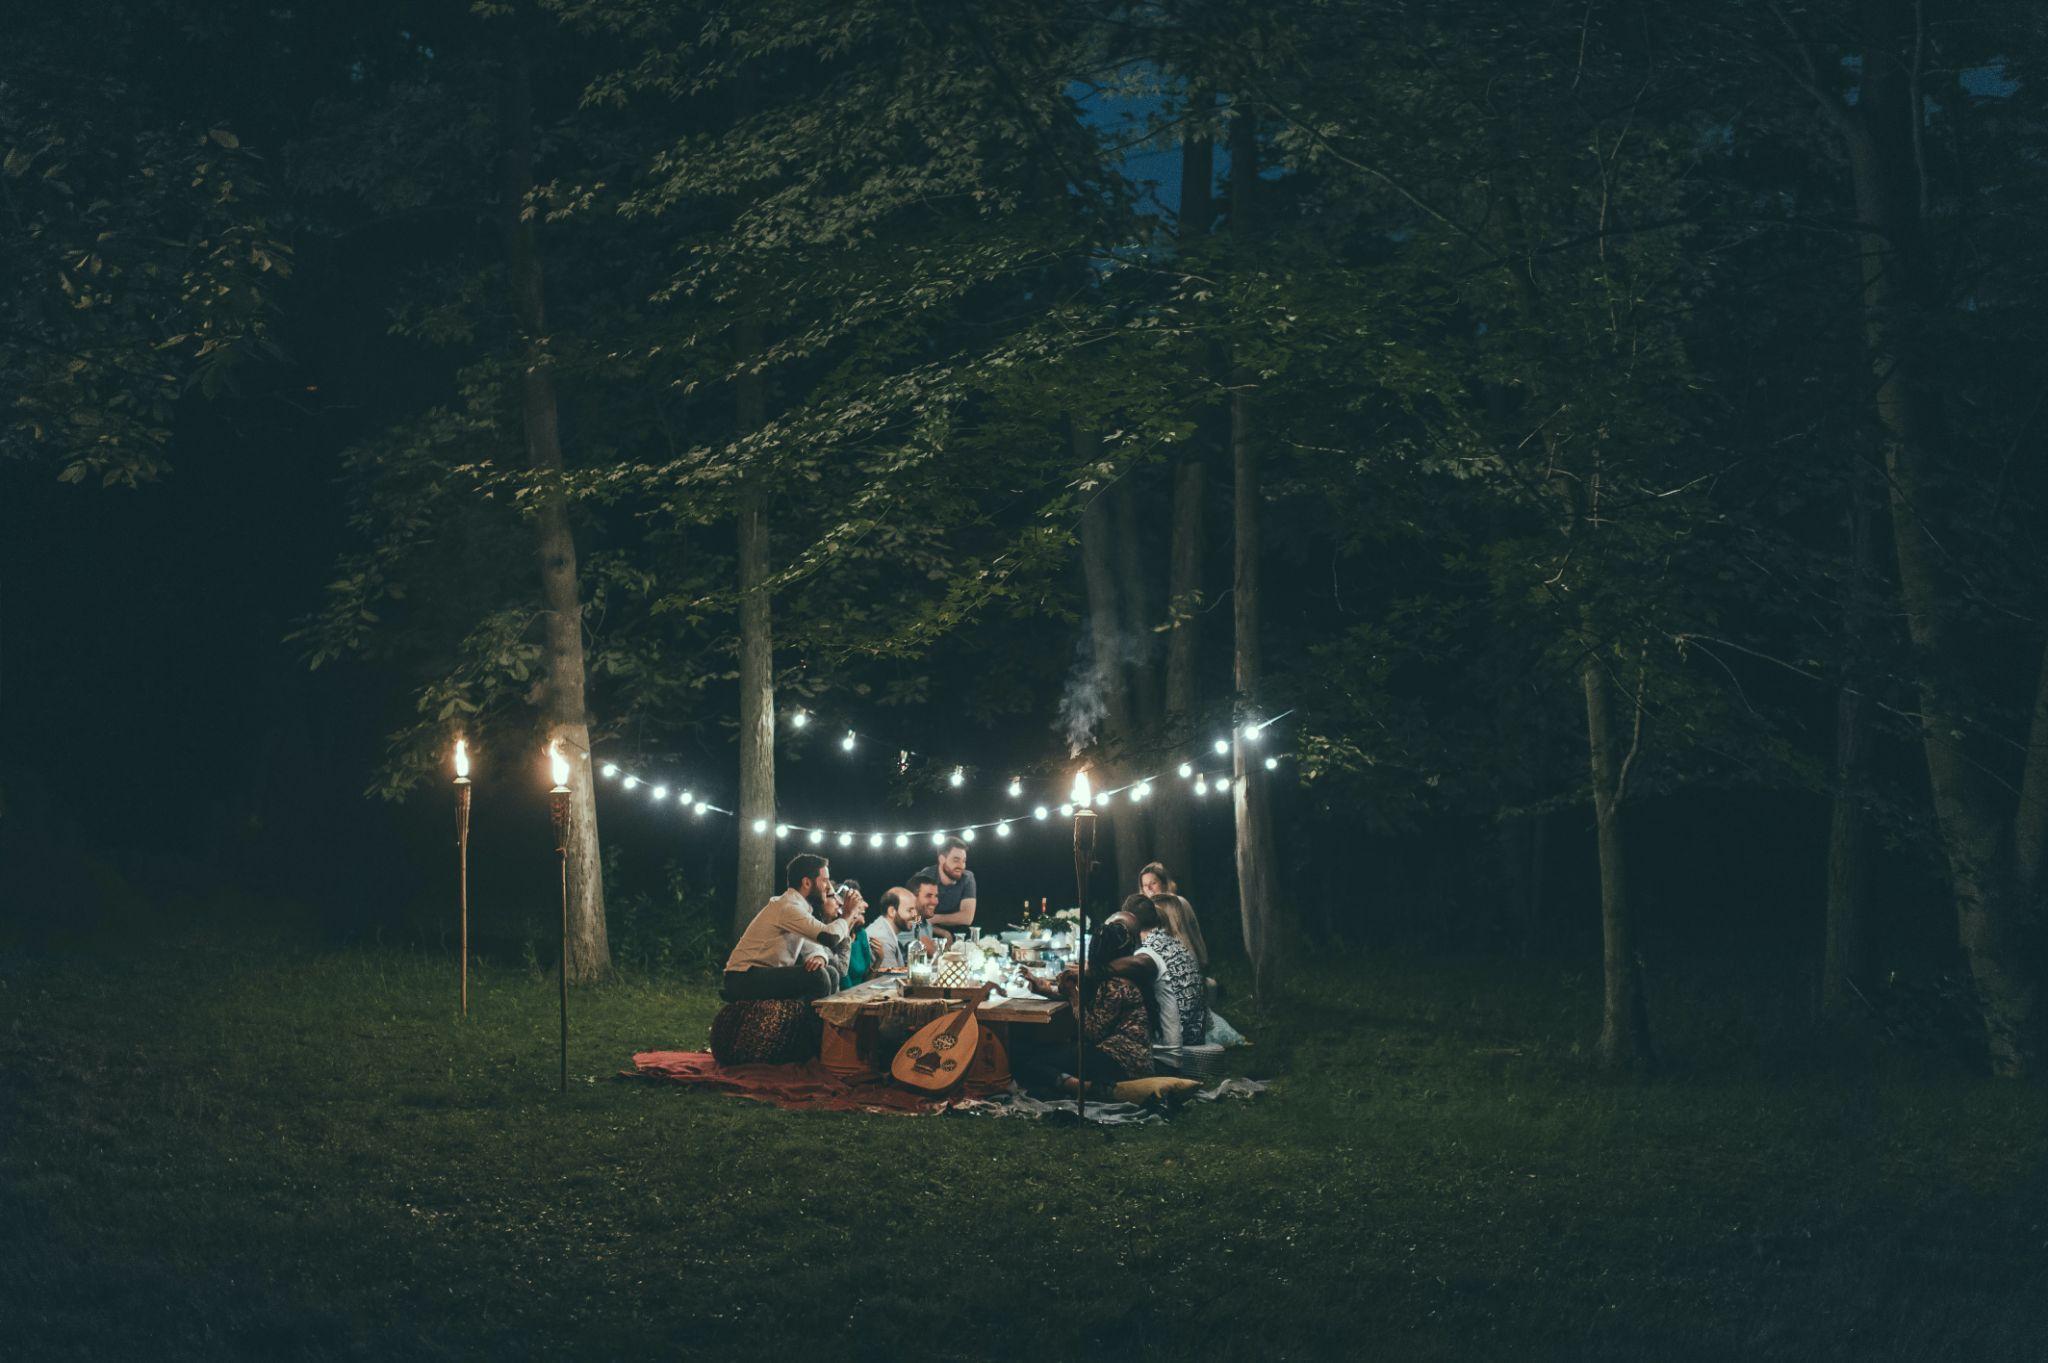 People hanging out for movies and dinner in the woods